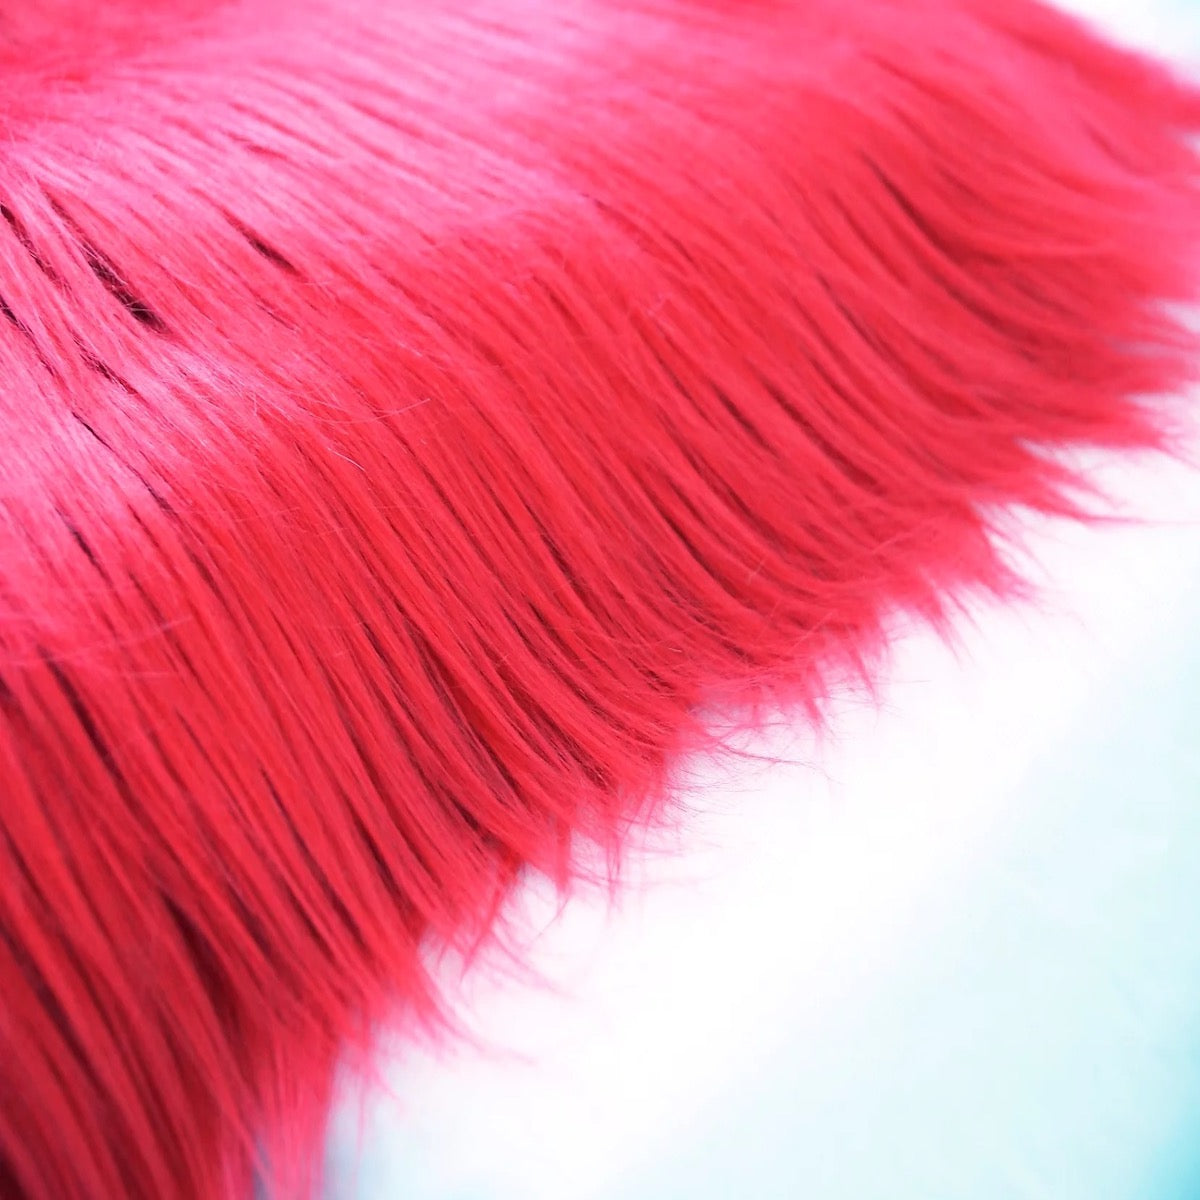 Faux / Fake Fur Shaggy RED Fabric By the Yard : : Home